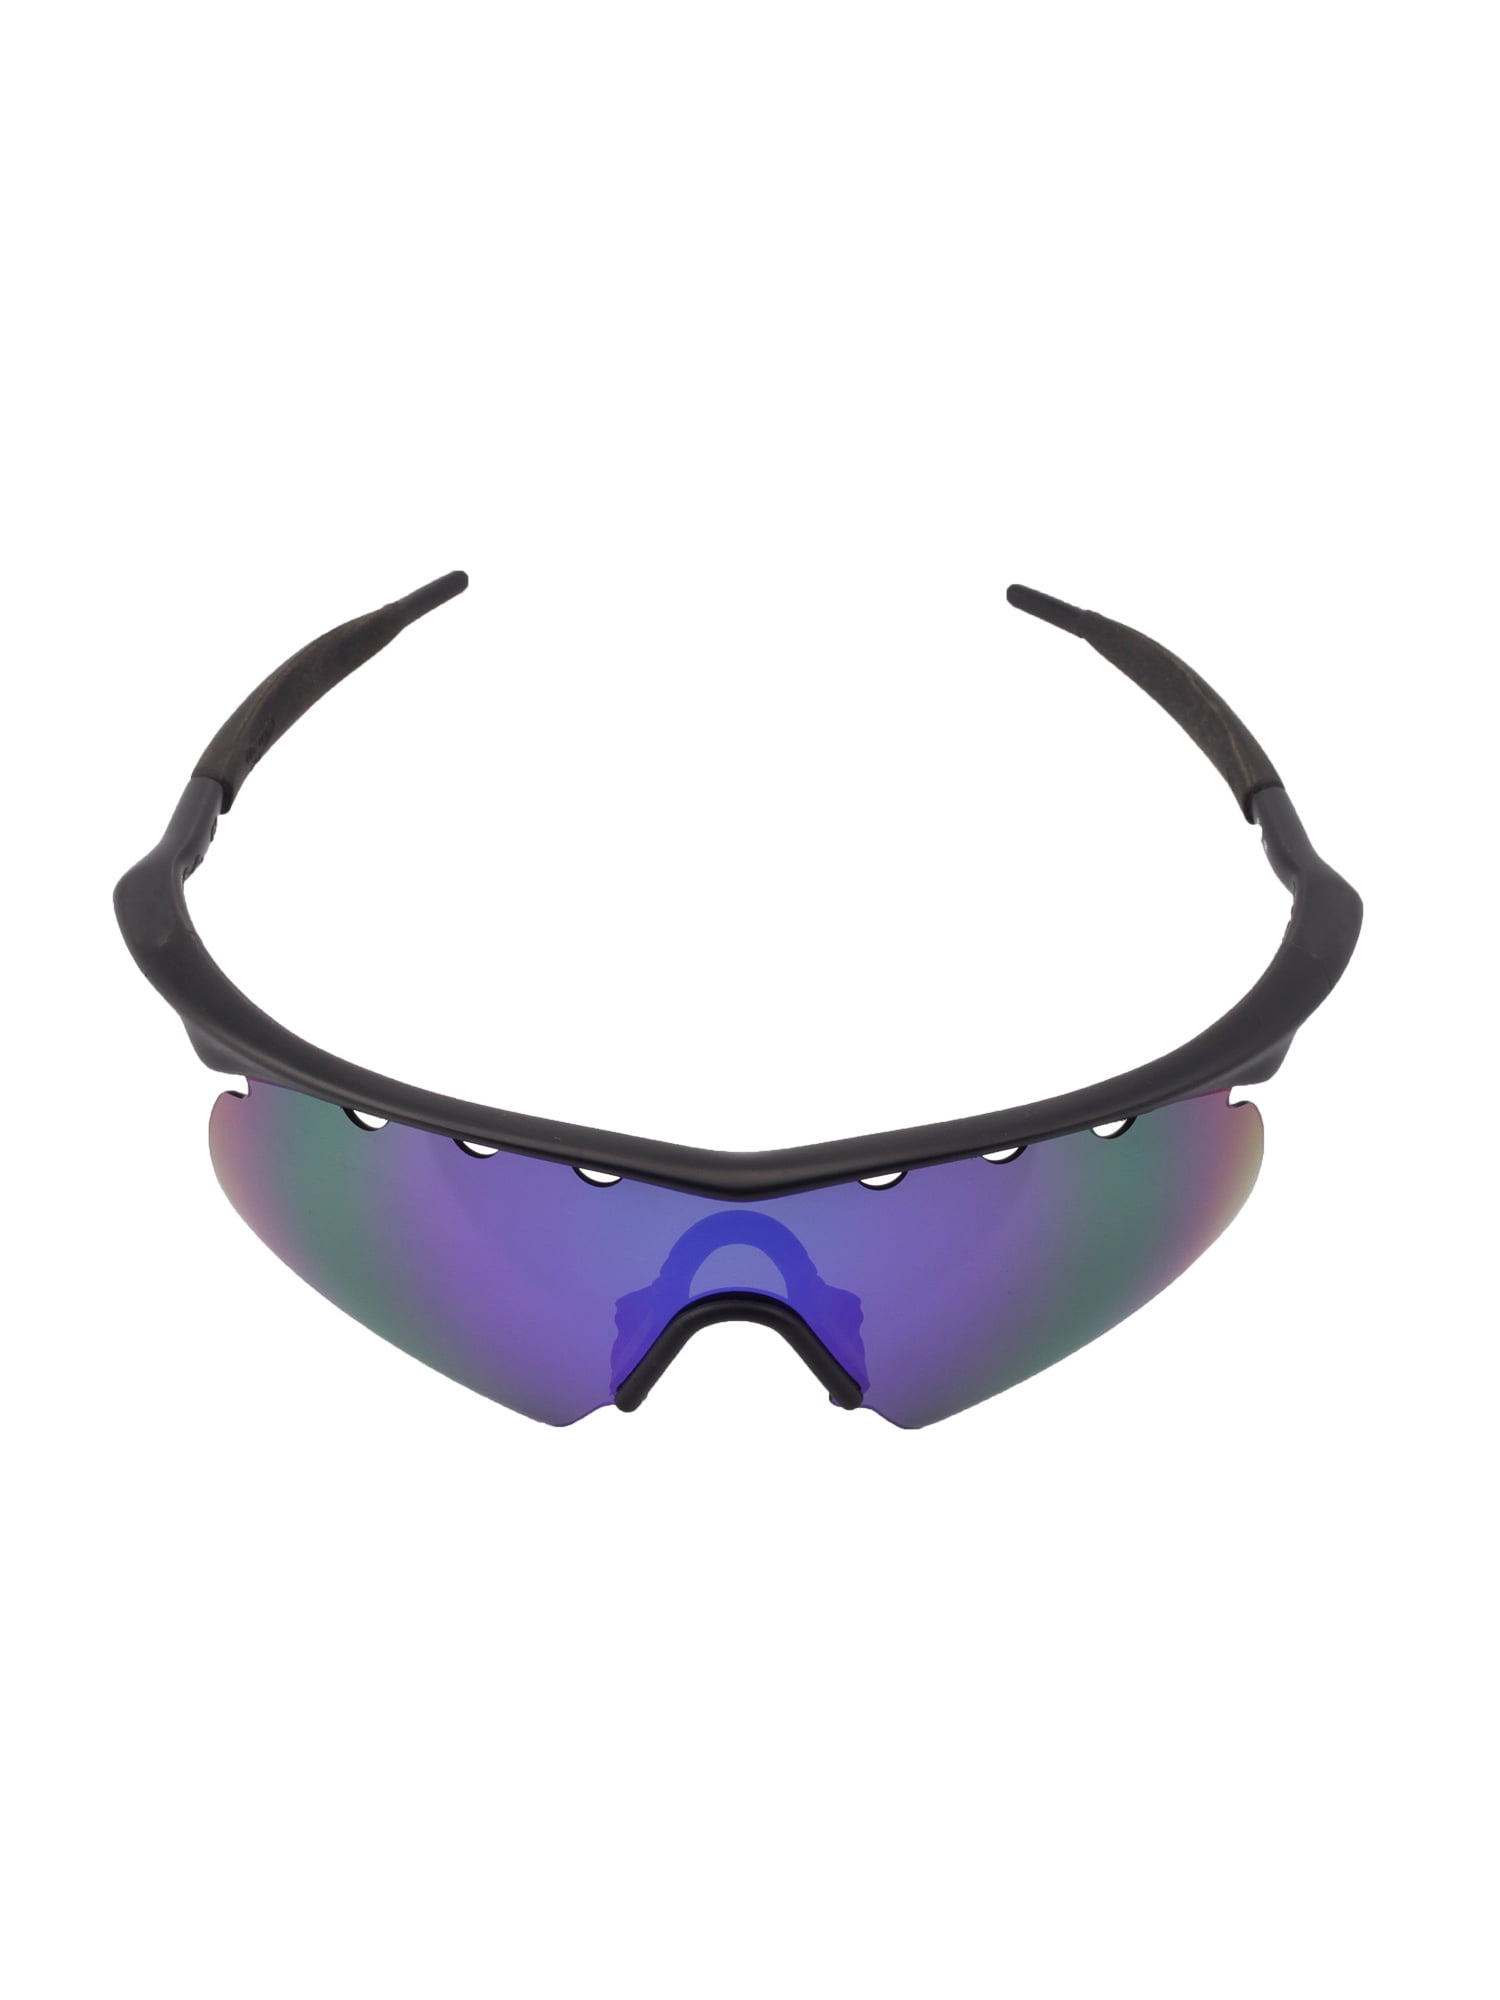 Bsymbo Purple Red Mirror Polarized Replacement Lenses For-Oakley Juliet  Sunglasses Frame 100% UVA & UVB Protection